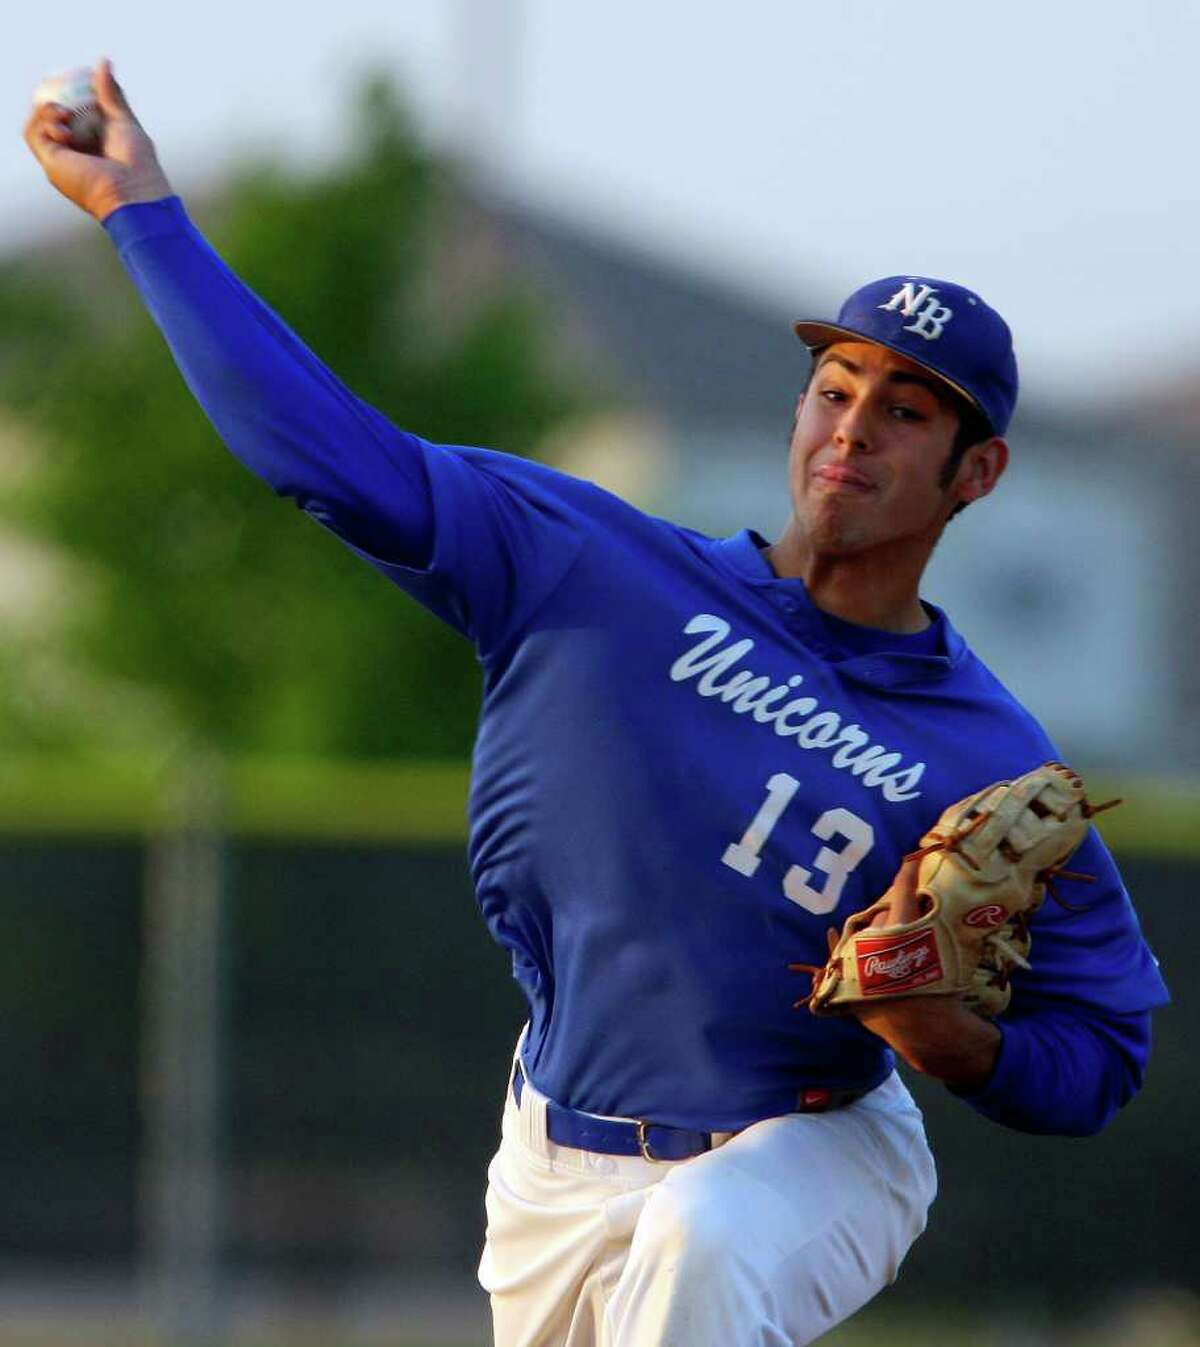 FOR SPORTS - New Braunfels' Ralph Garza pitches against Steele Friday April 15, 2011 at Steele High School. (PHOTO BY EDWARD A. ORNELAS/eaornelas@express-news.net)